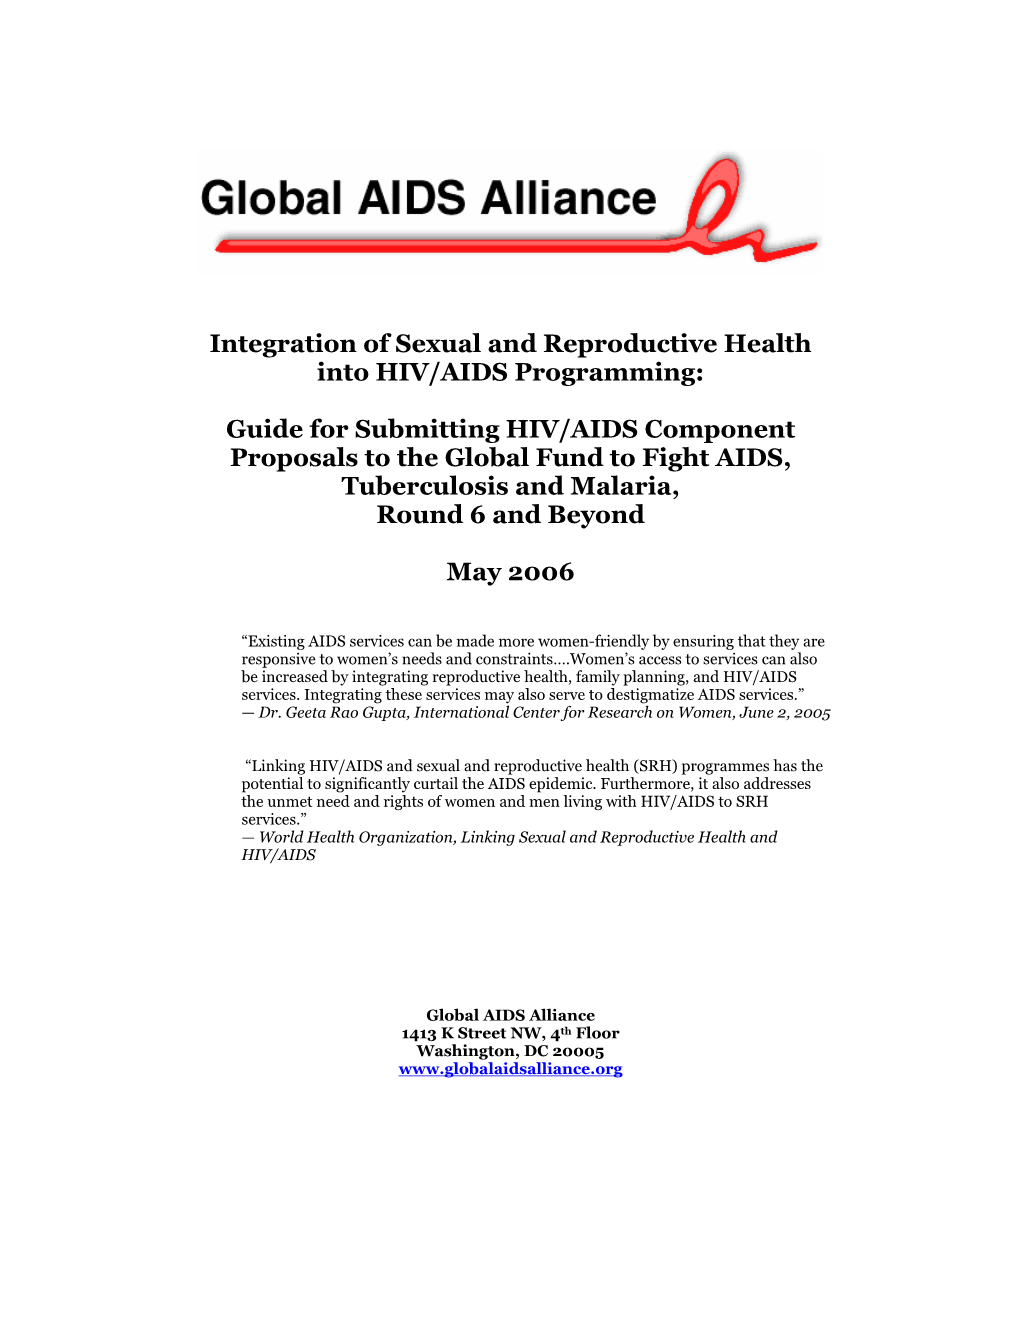 Integration of Sexual and Reproductive Health Into HIV/AIDS Programming